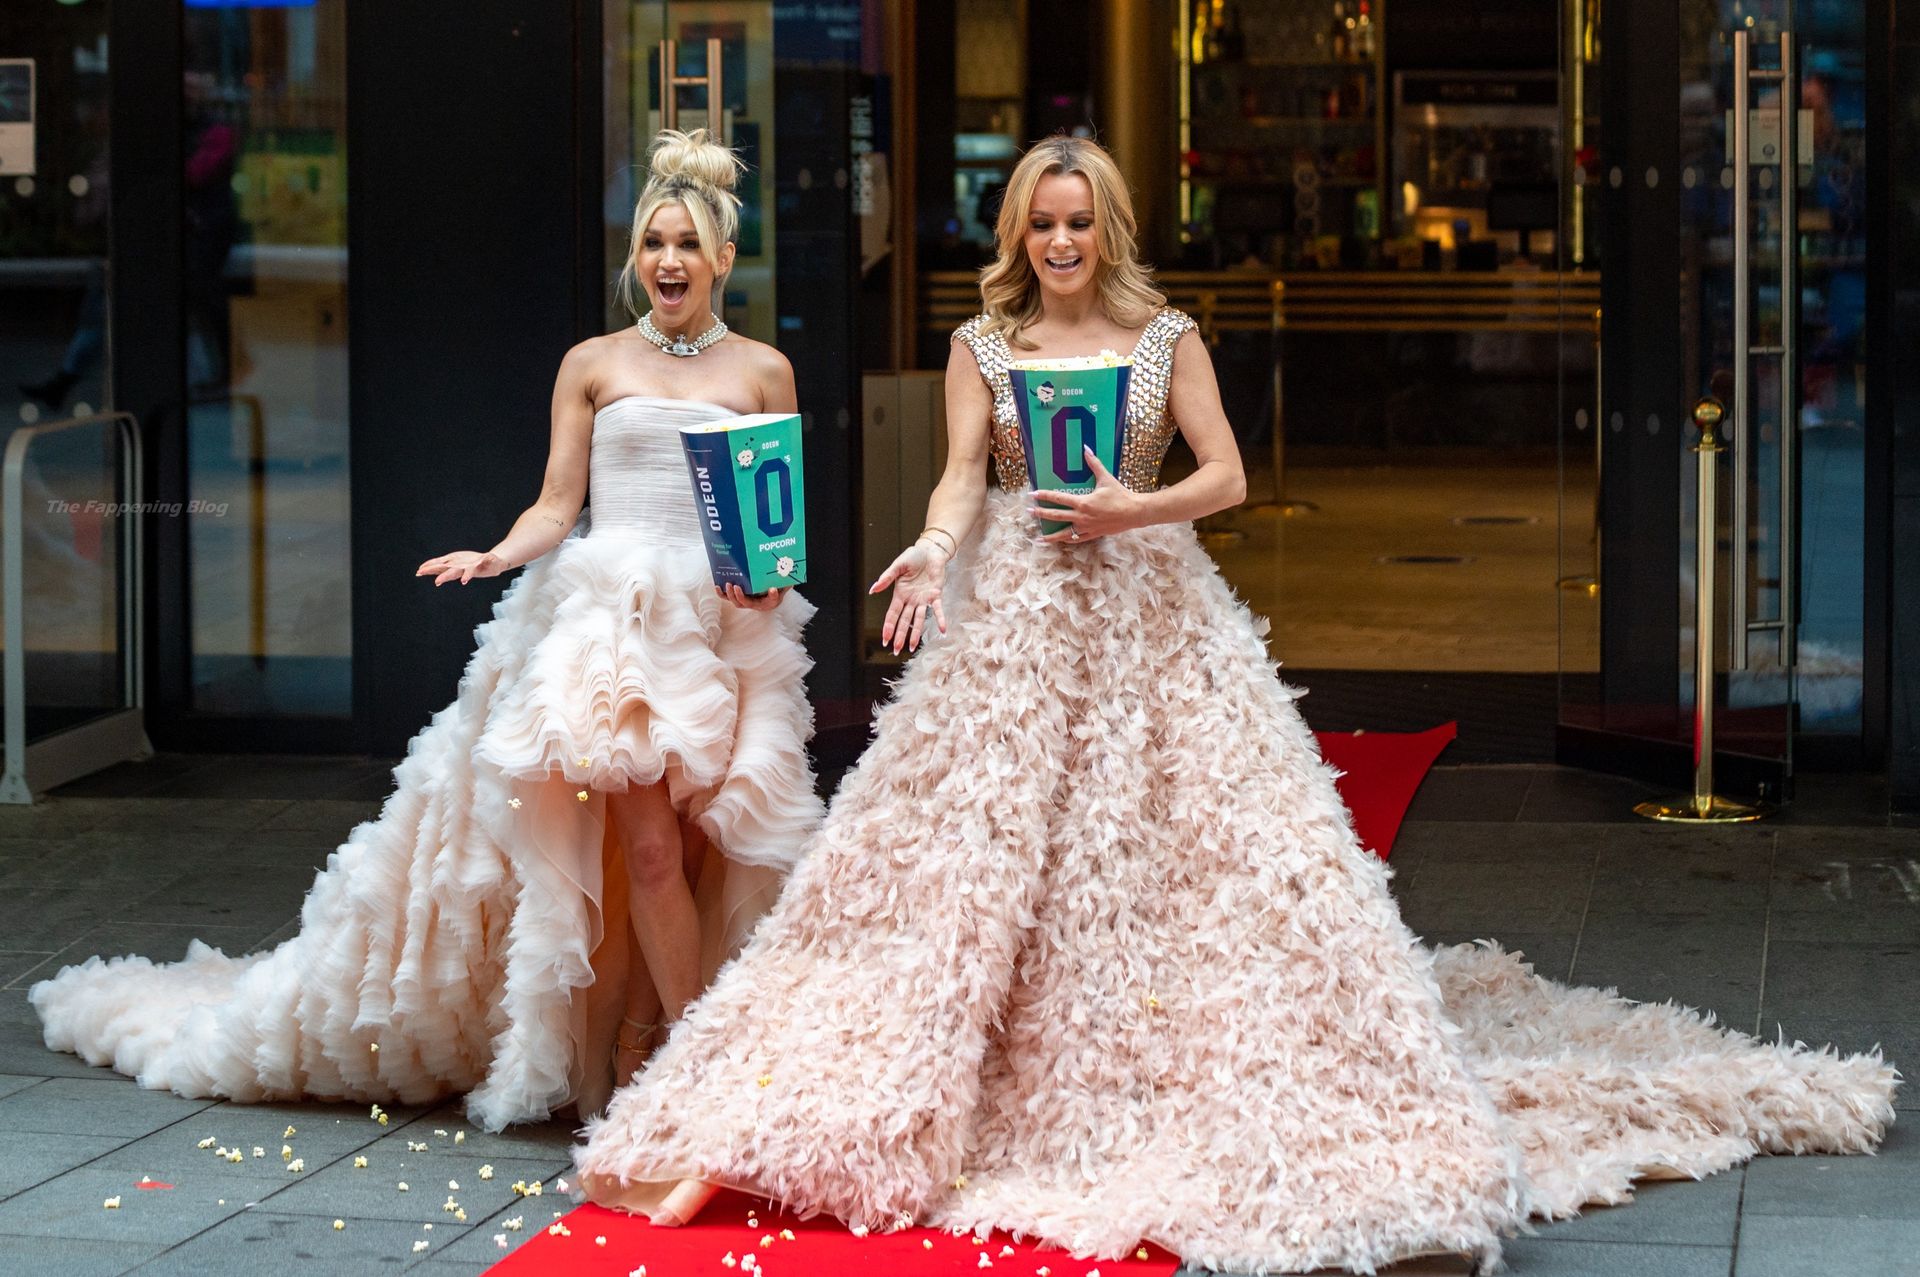 Amanda Holden & Ashley Roberts Visit The Odeon Cinema London’s Leicester Square (52 Photos)